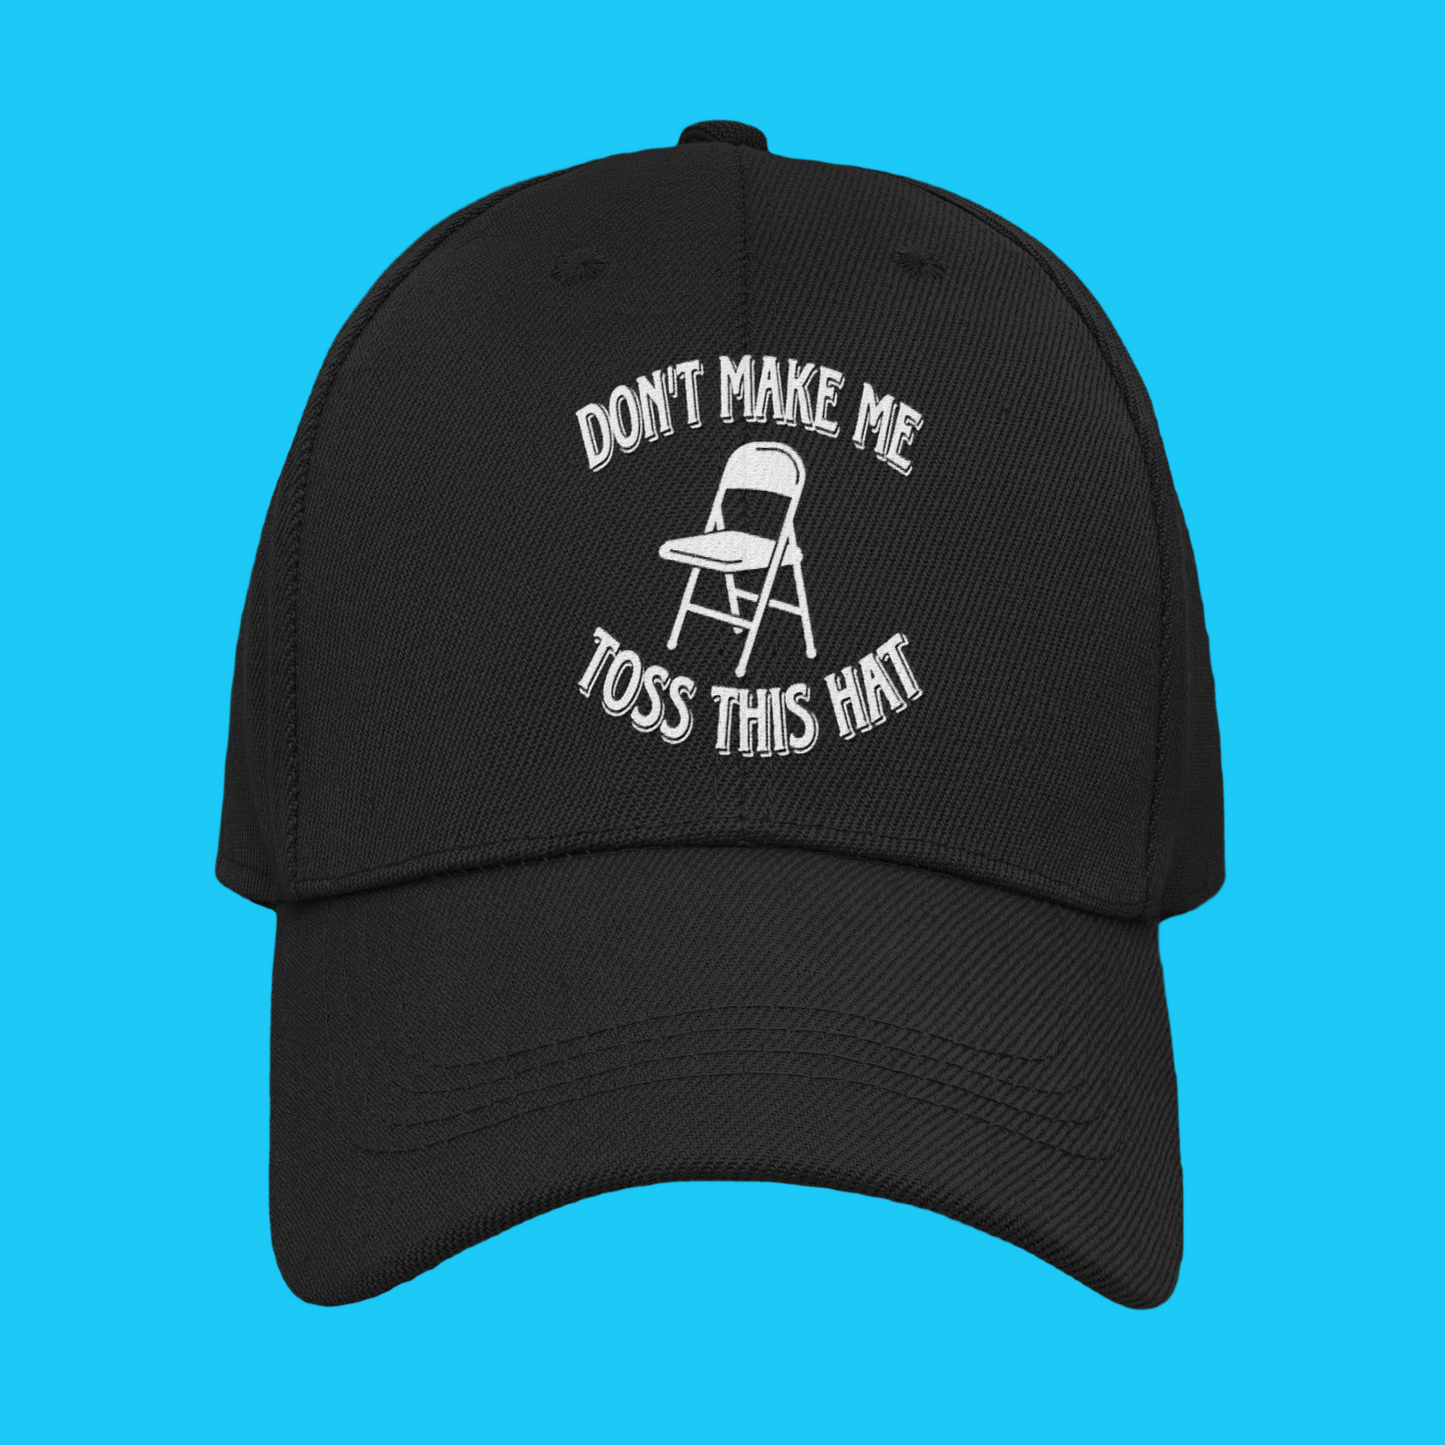 "Don't Make Me Toss This Hat" Dad Hat